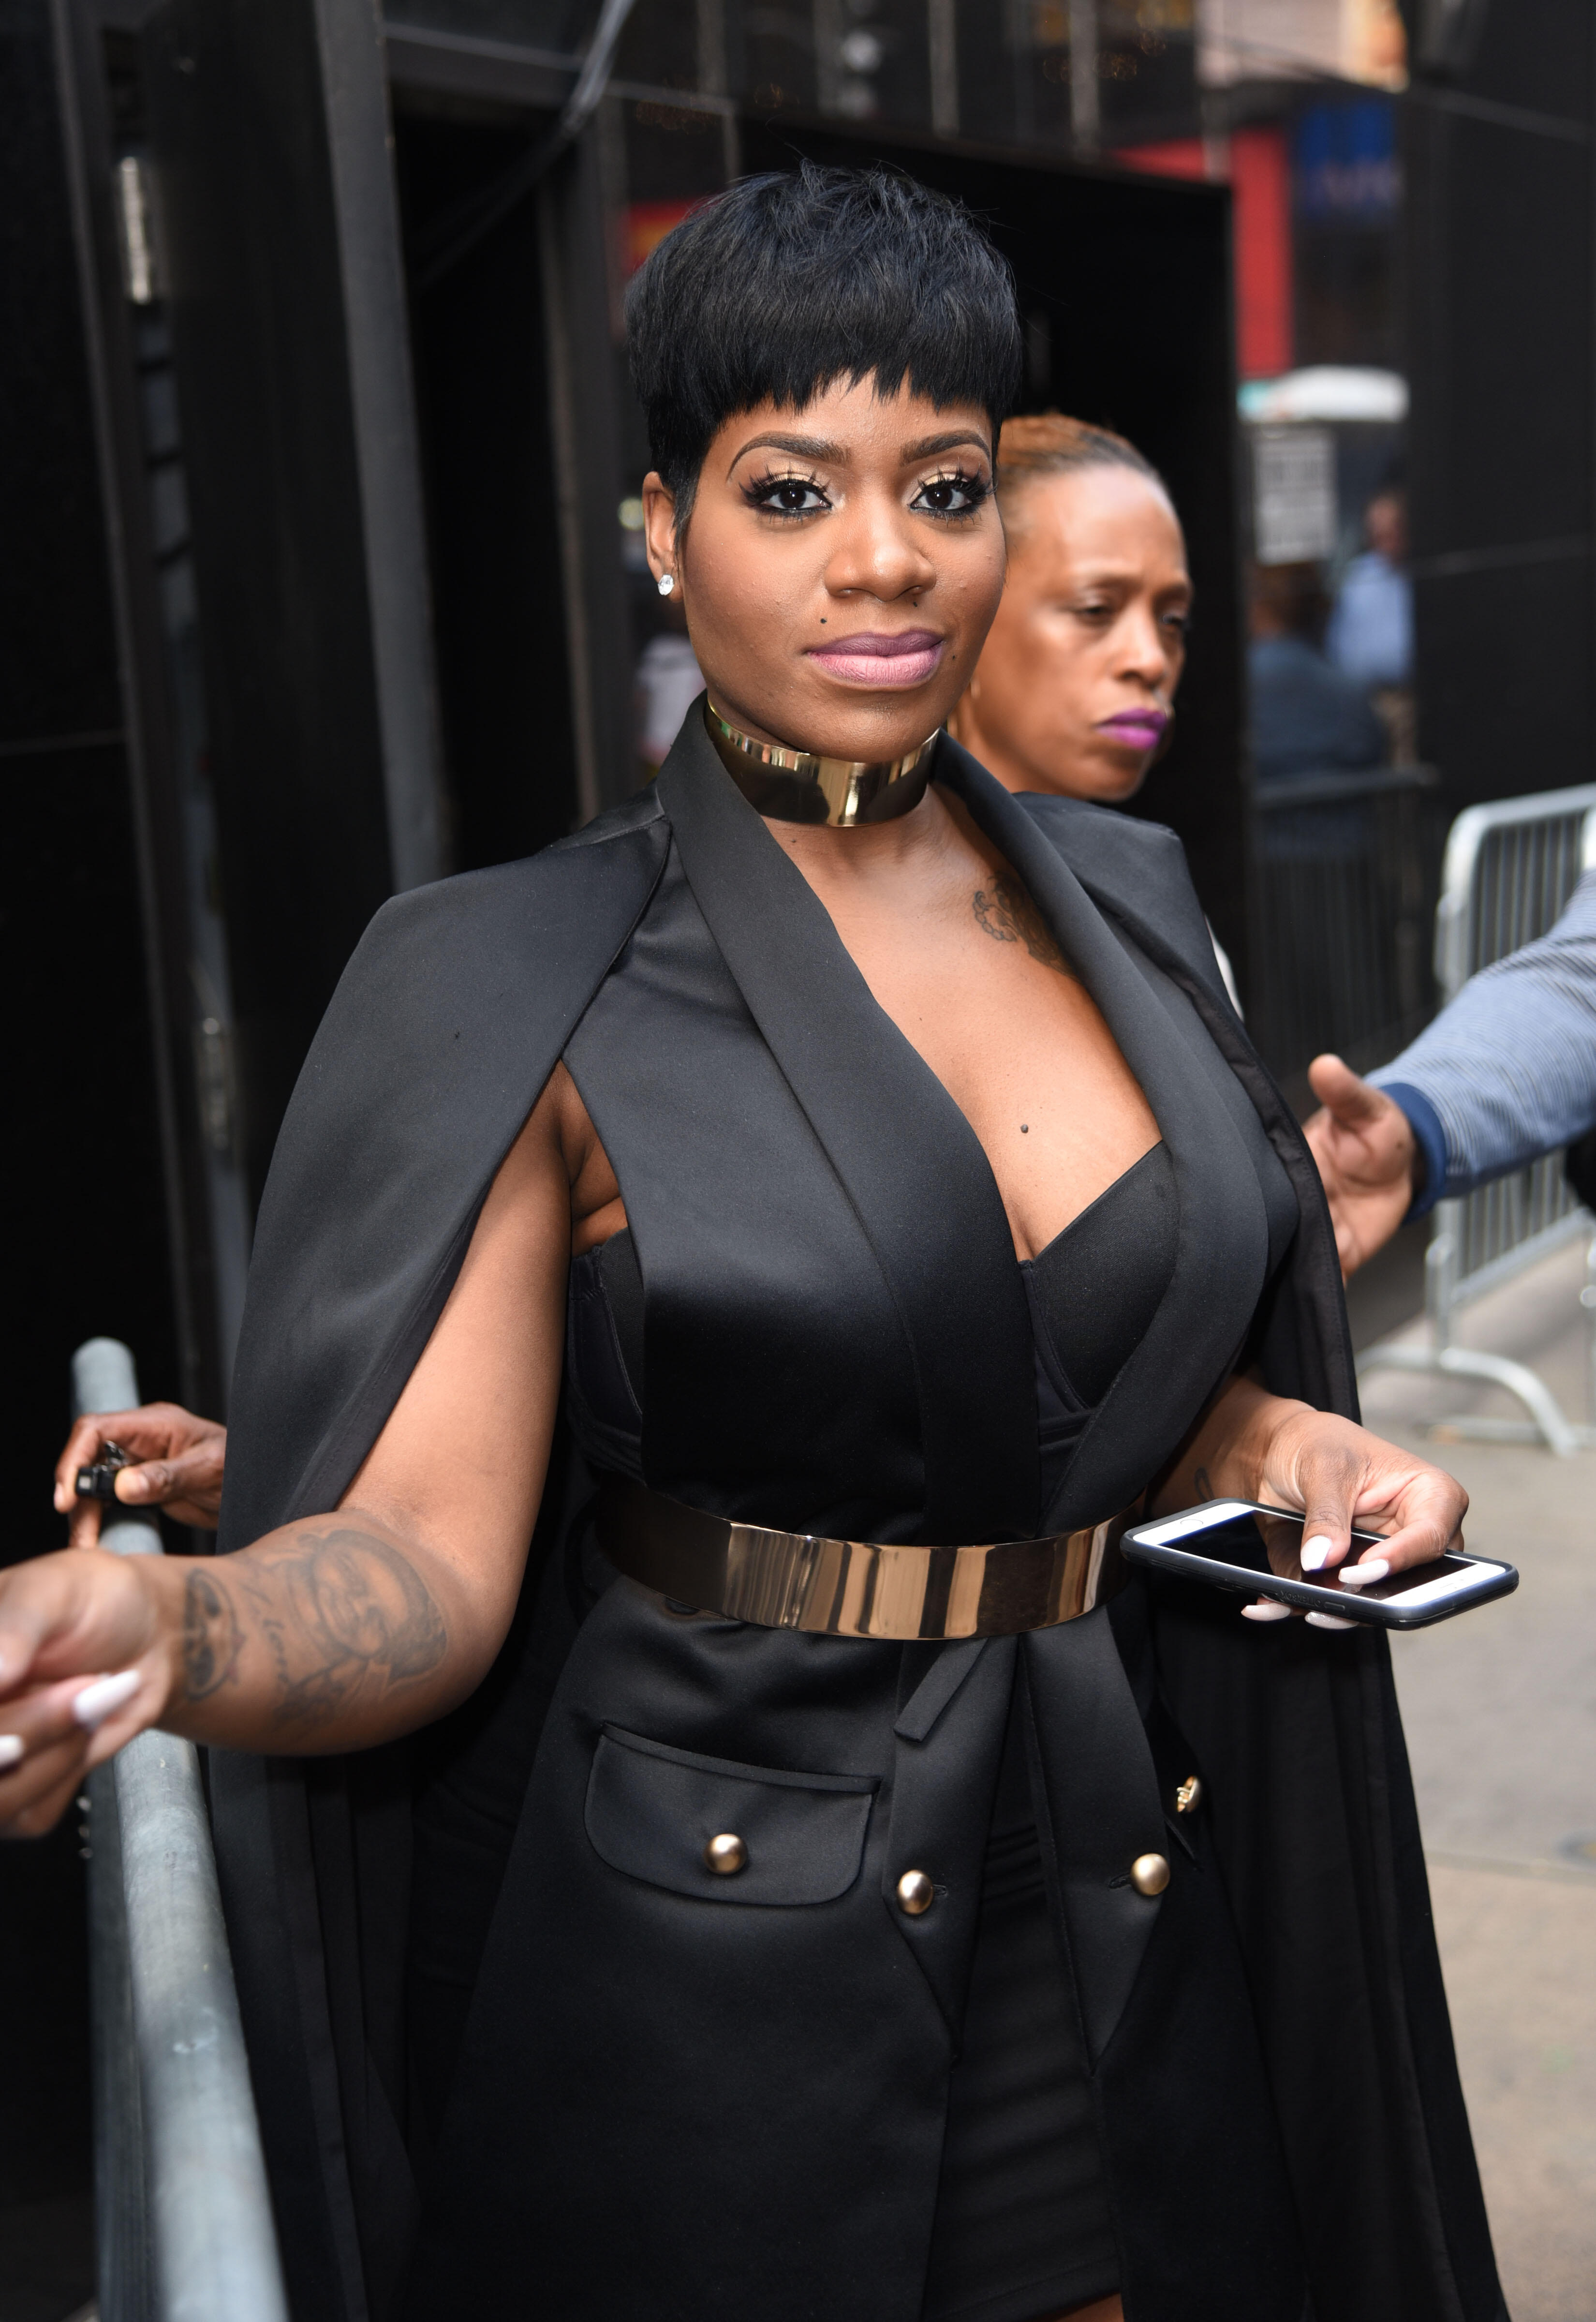 Fantasia Barrino raised eyebrows after meeting and marrying husband Kendall...